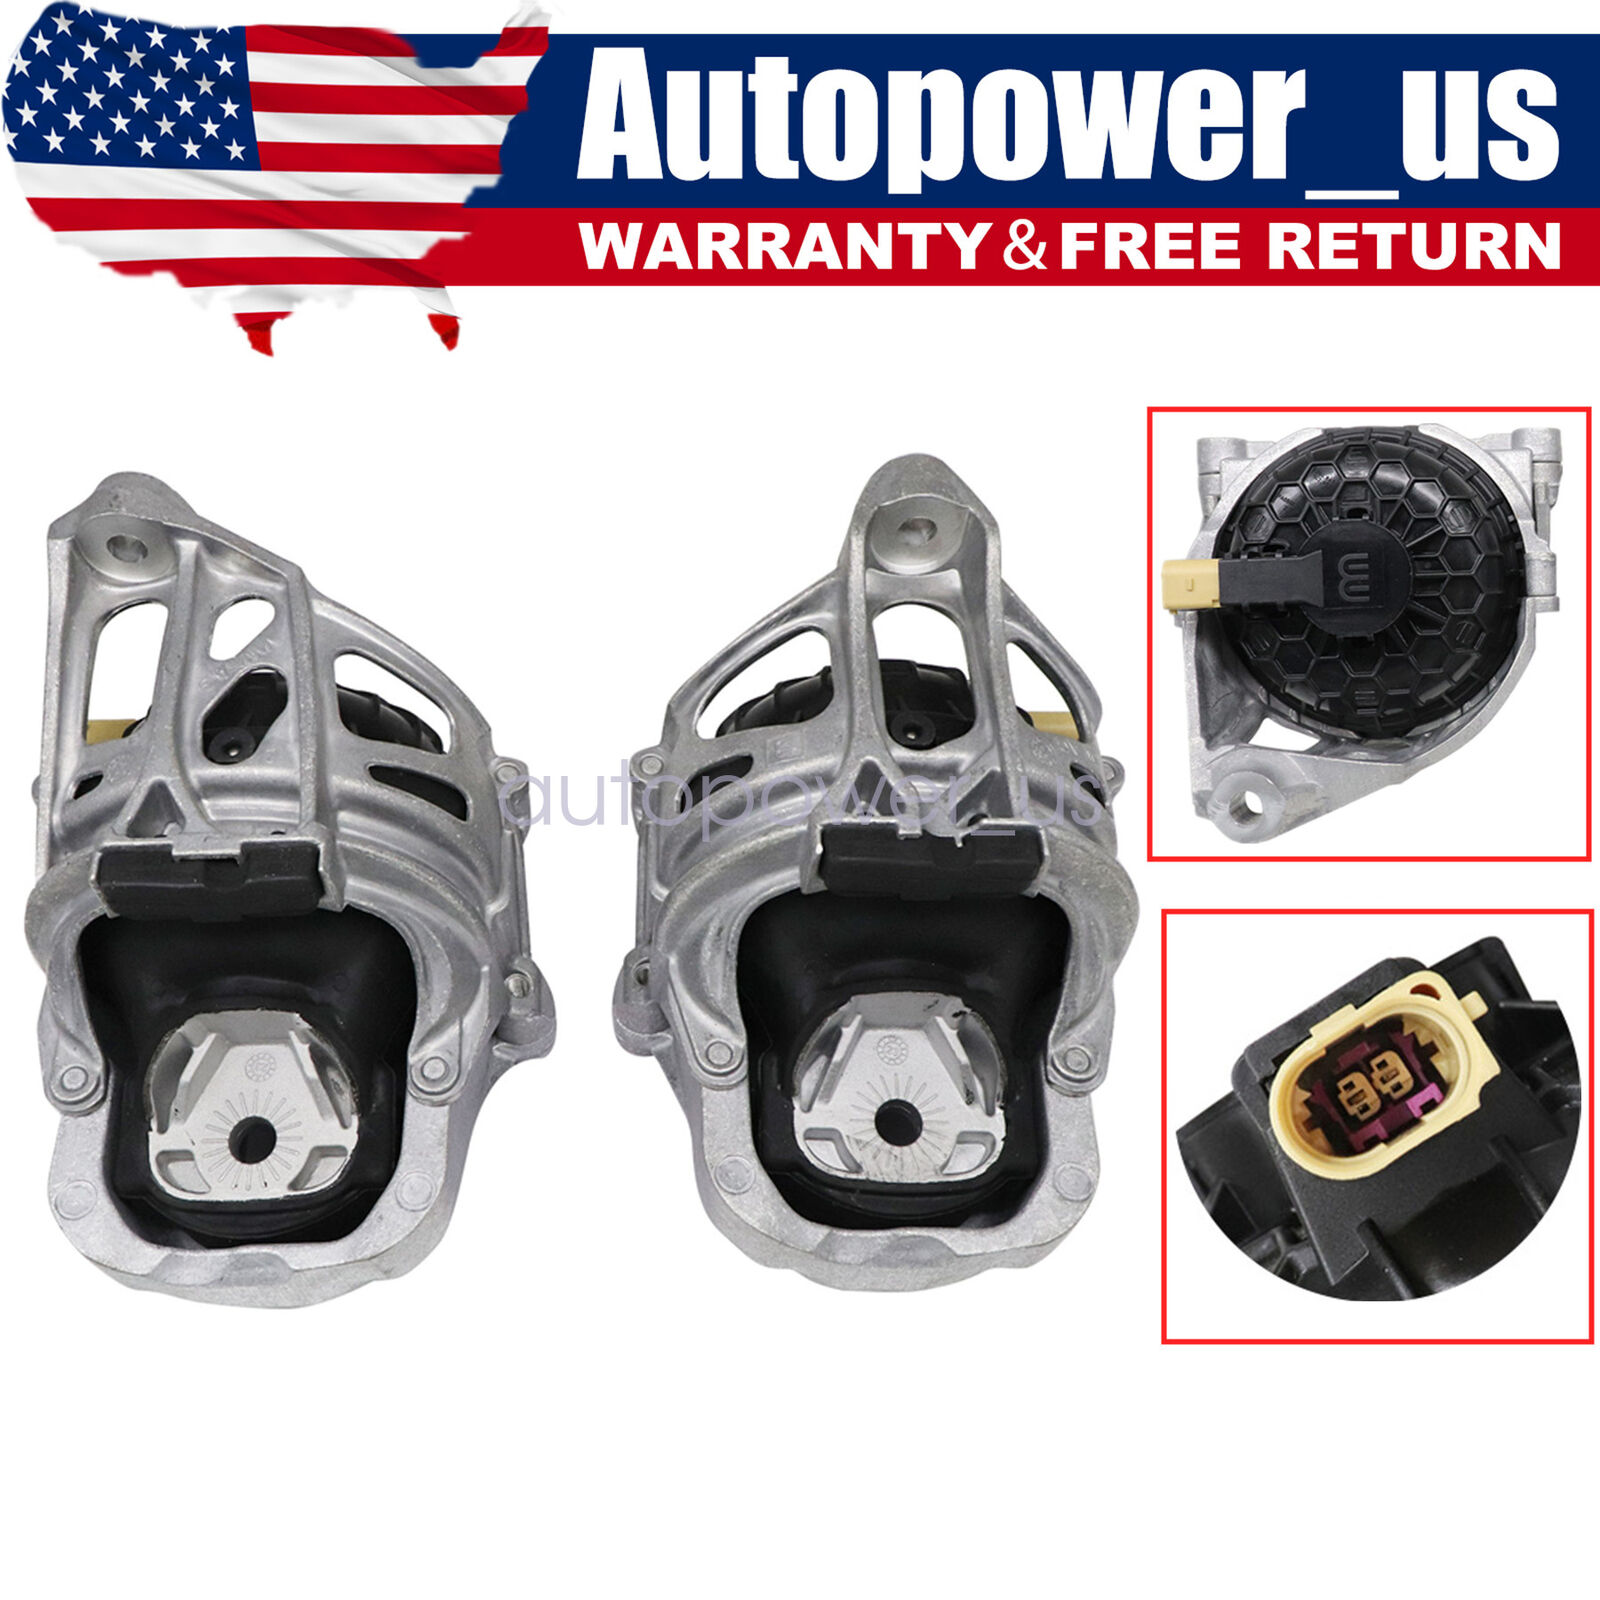 NEW 1 Pair of Left + Right Engine Mounts For Audi A6 A7 A8 Quattro Q7 VW 3.0L